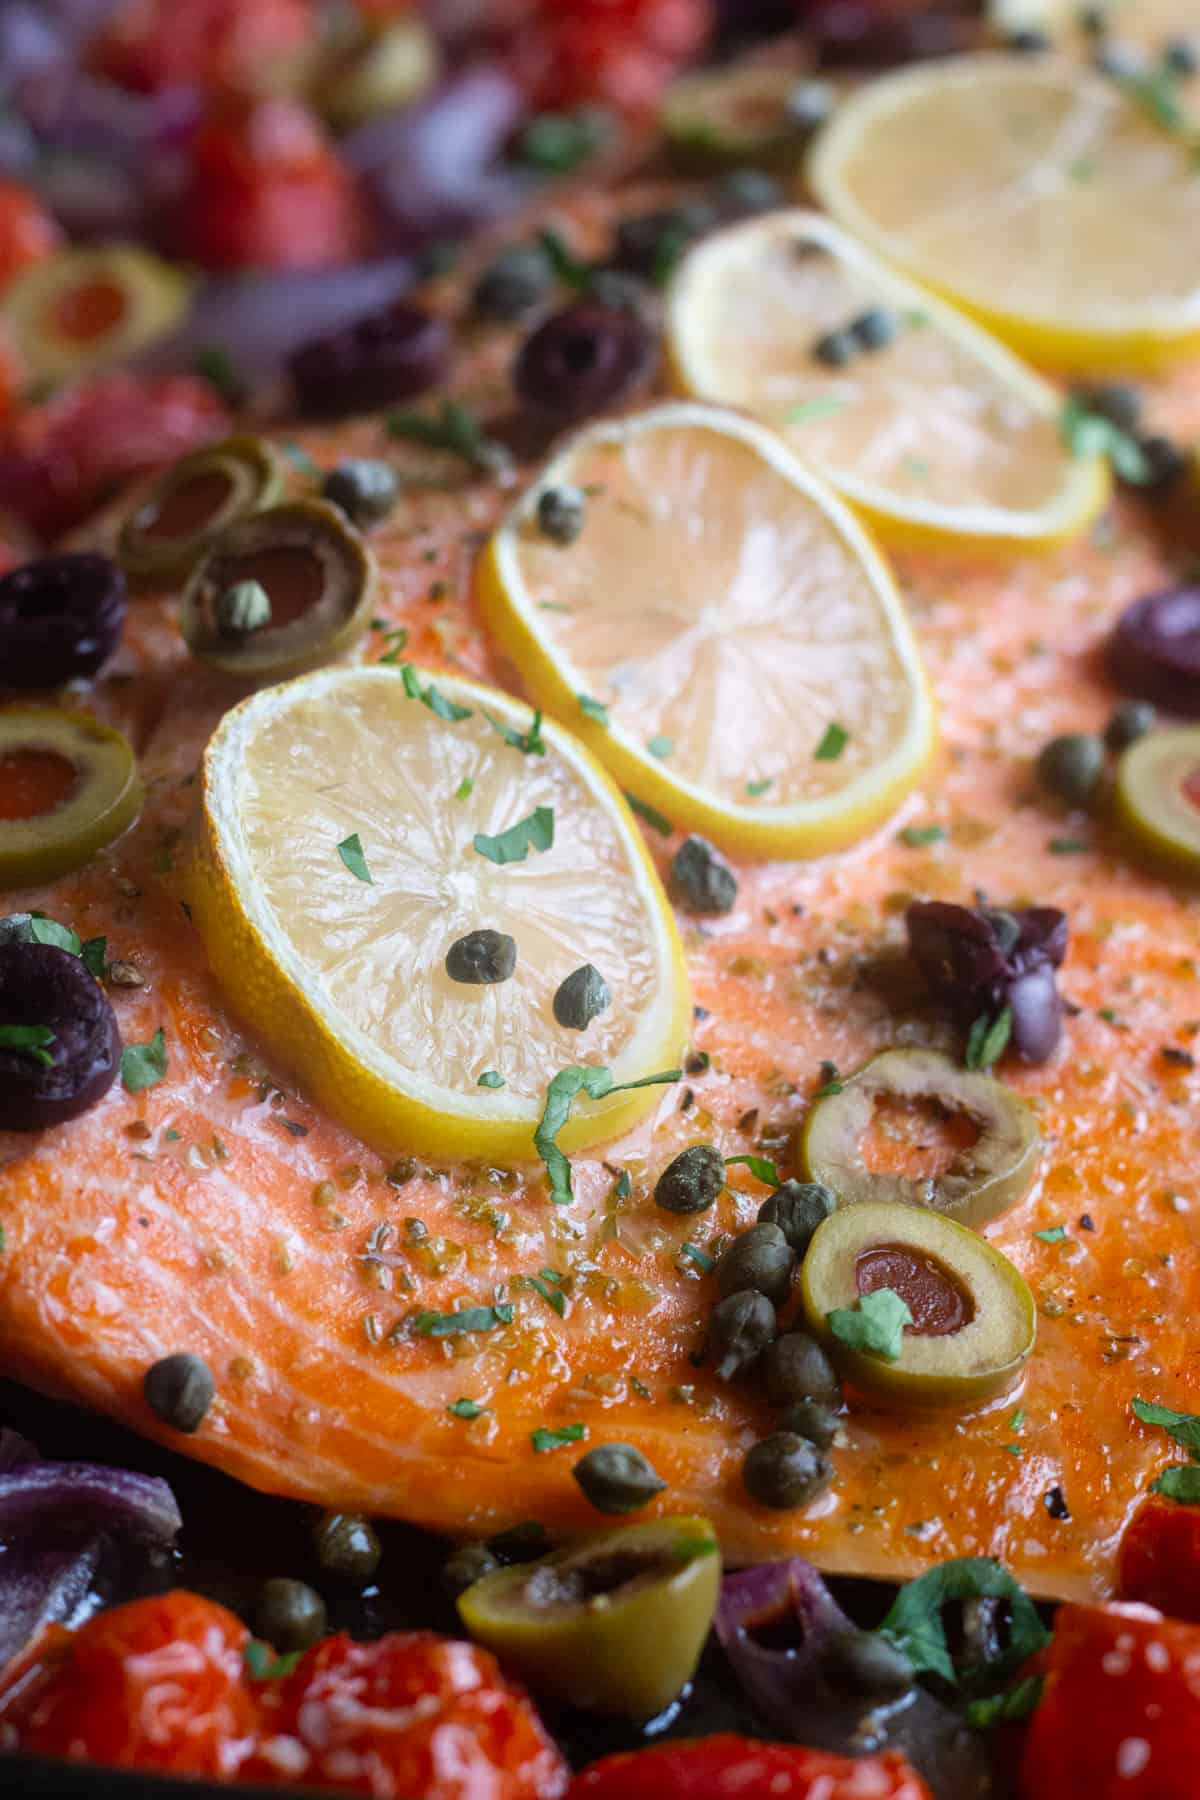 bake salmon in the oven for 20 minutes until flaky. 